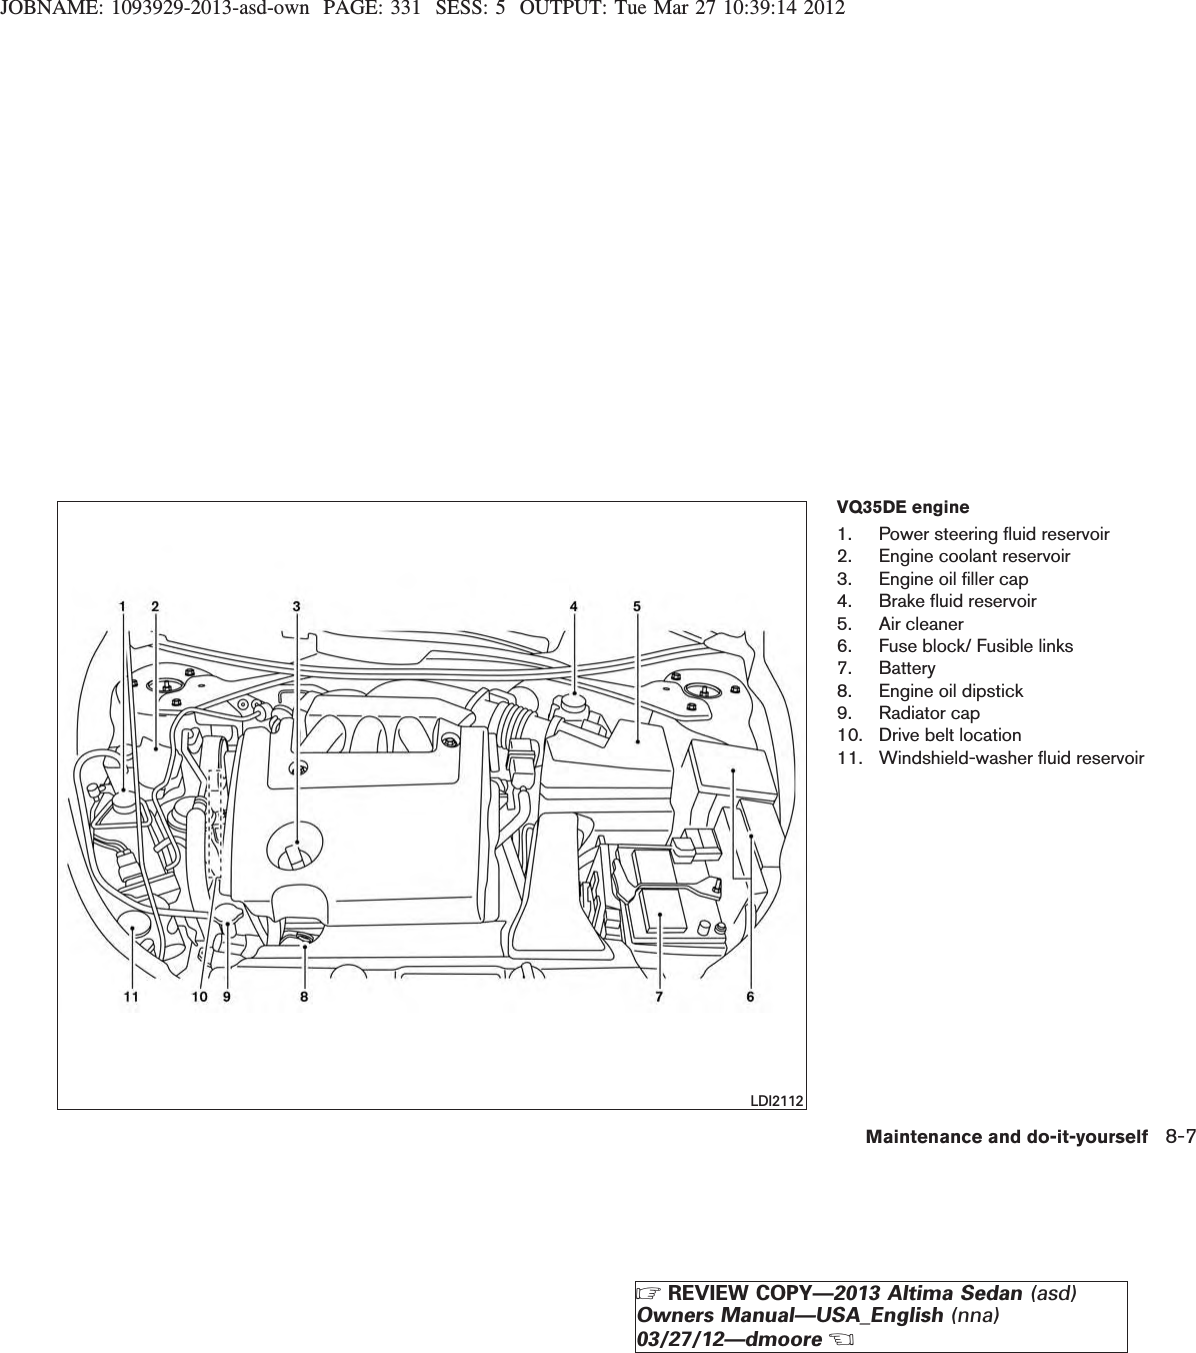 JOBNAME: 1093929-2013-asd-own PAGE: 331 SESS: 5 OUTPUT: Tue Mar 27 10:39:14 2012VQ35DE engine1. Power steering fluid reservoir2. Engine coolant reservoir3. Engine oil filler cap4. Brake fluid reservoir5. Air cleaner6. Fuse block/ Fusible links7. Battery8. Engine oil dipstick9. Radiator cap10. Drive belt location11. Windshield-washer fluid reservoirLDI2112Maintenance and do-it-yourself 8-7ZREVIEW COPY—2013 Altima Sedan (asd)Owners Manual—USA_English (nna)03/27/12—dmooreX